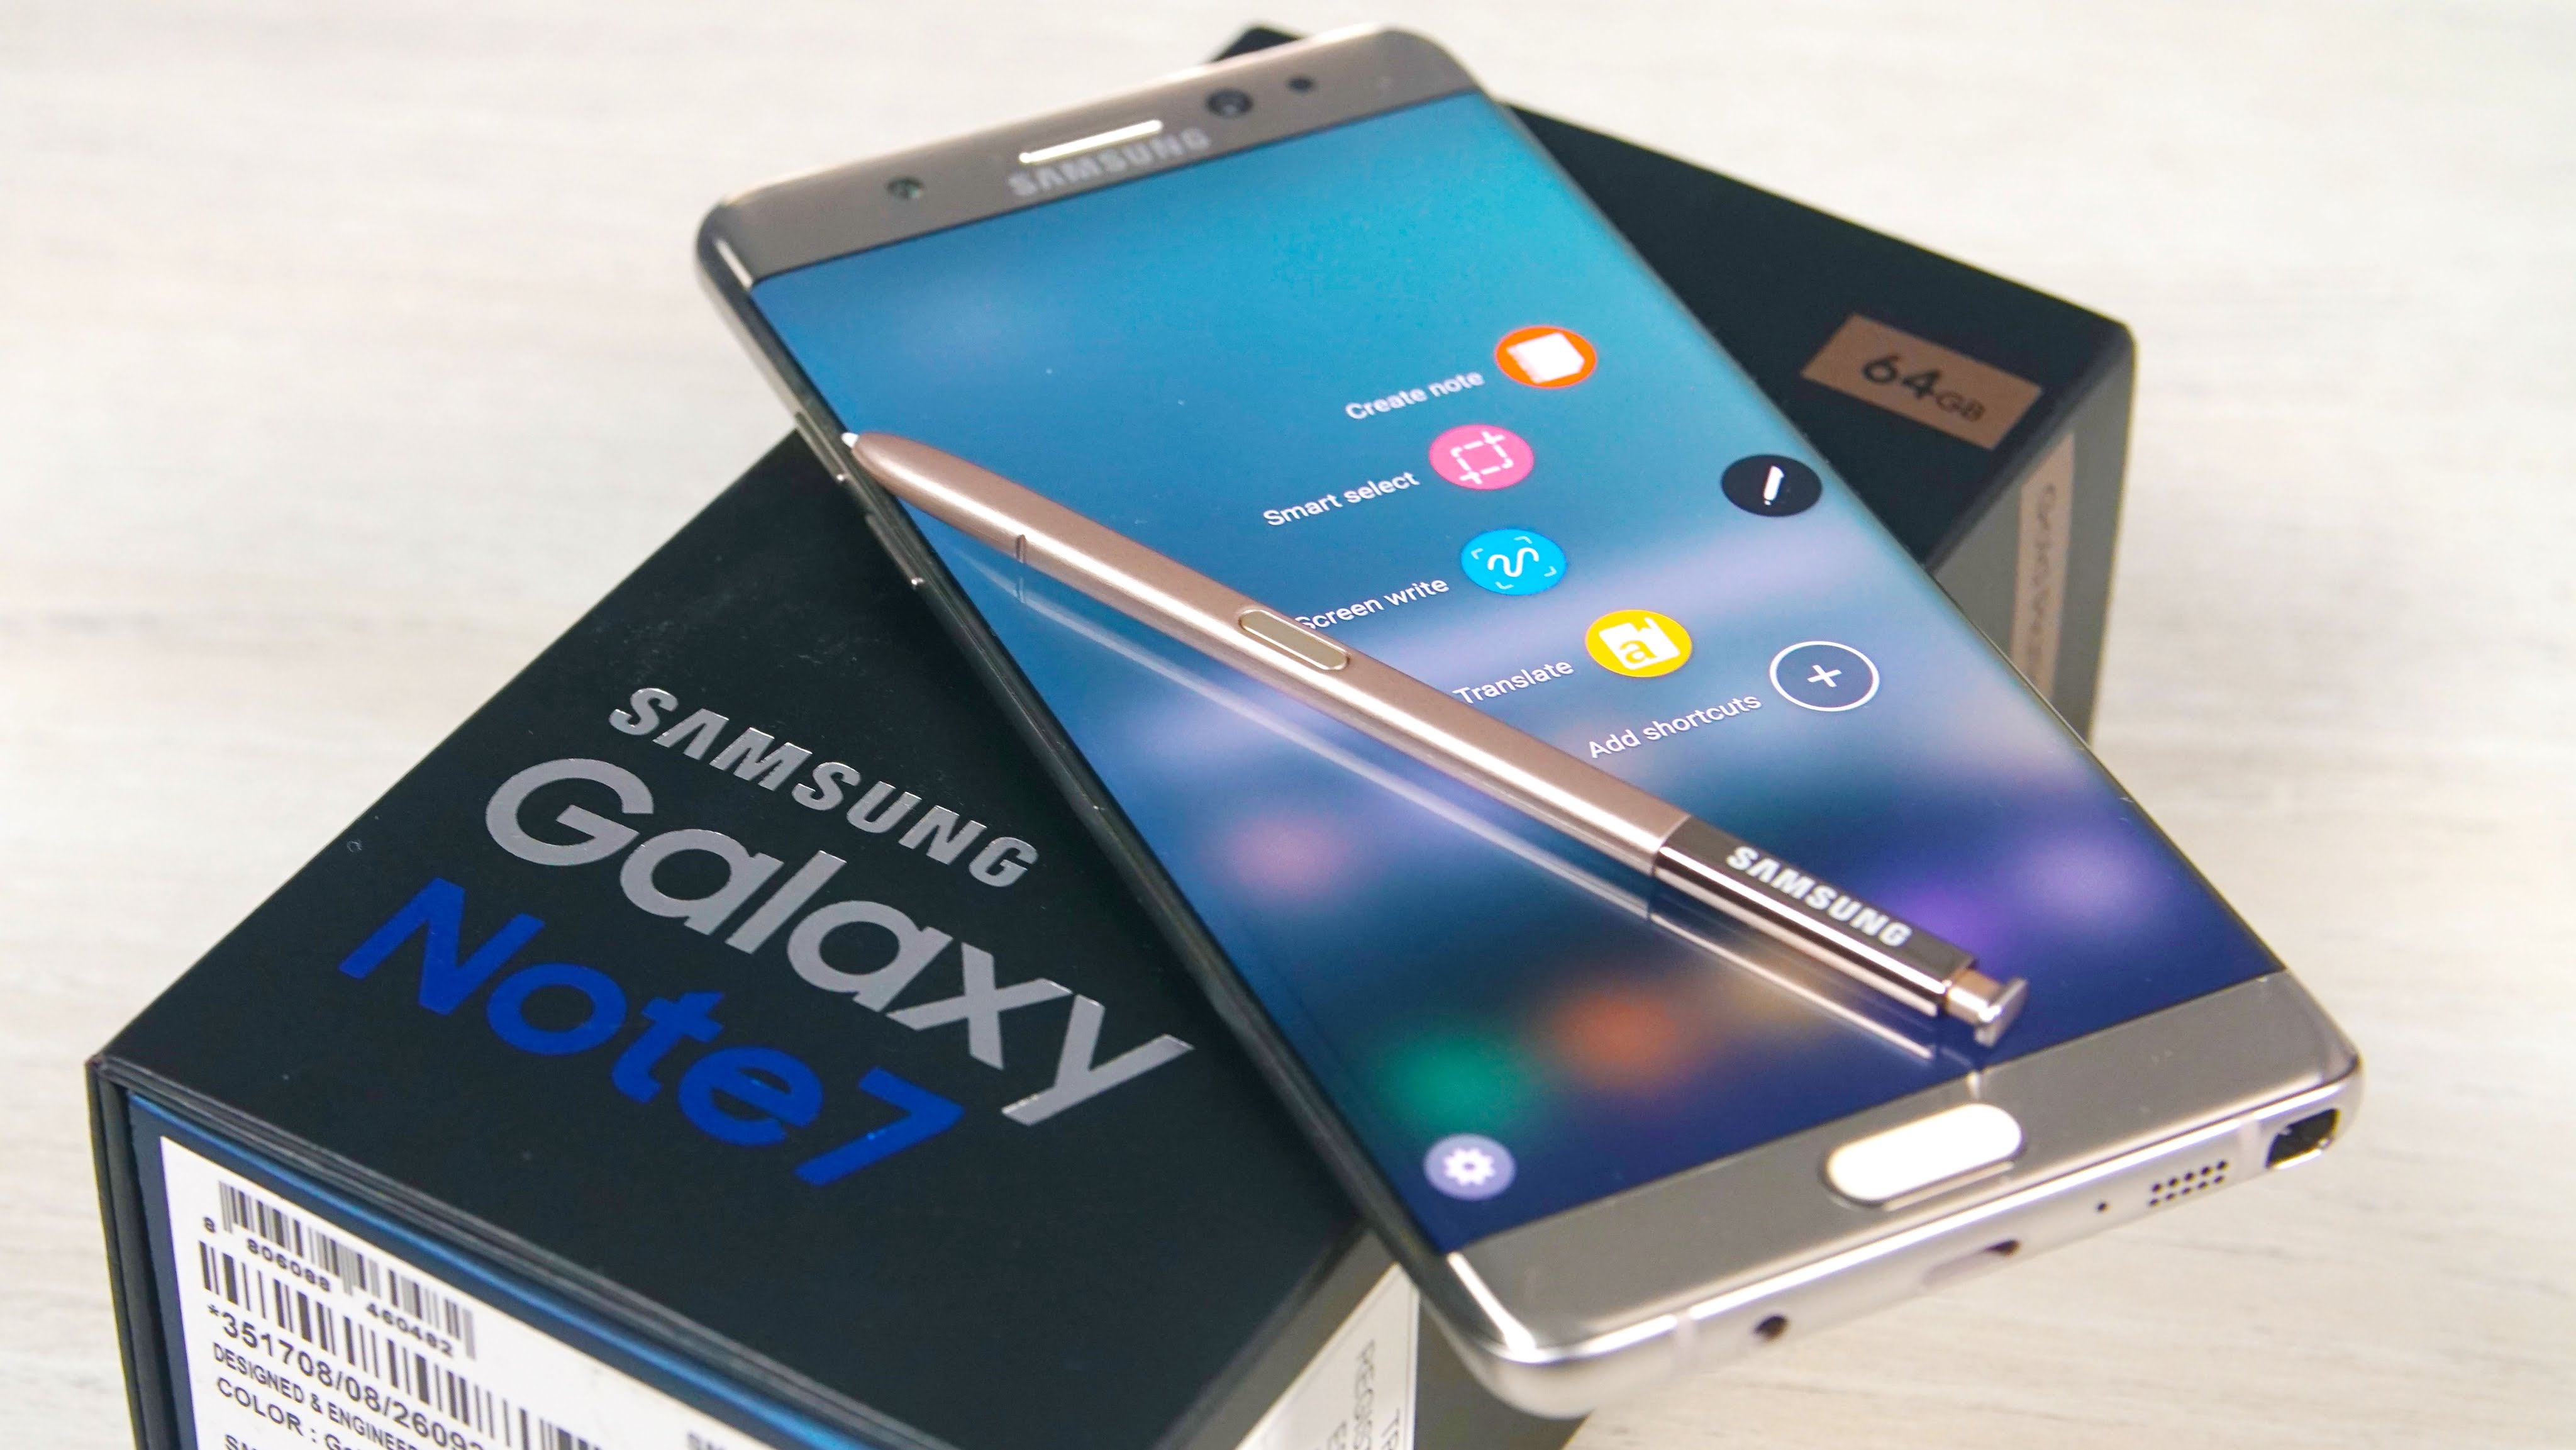 Batteries to blame for exploding Samsung Galaxy Note 7 smartphones